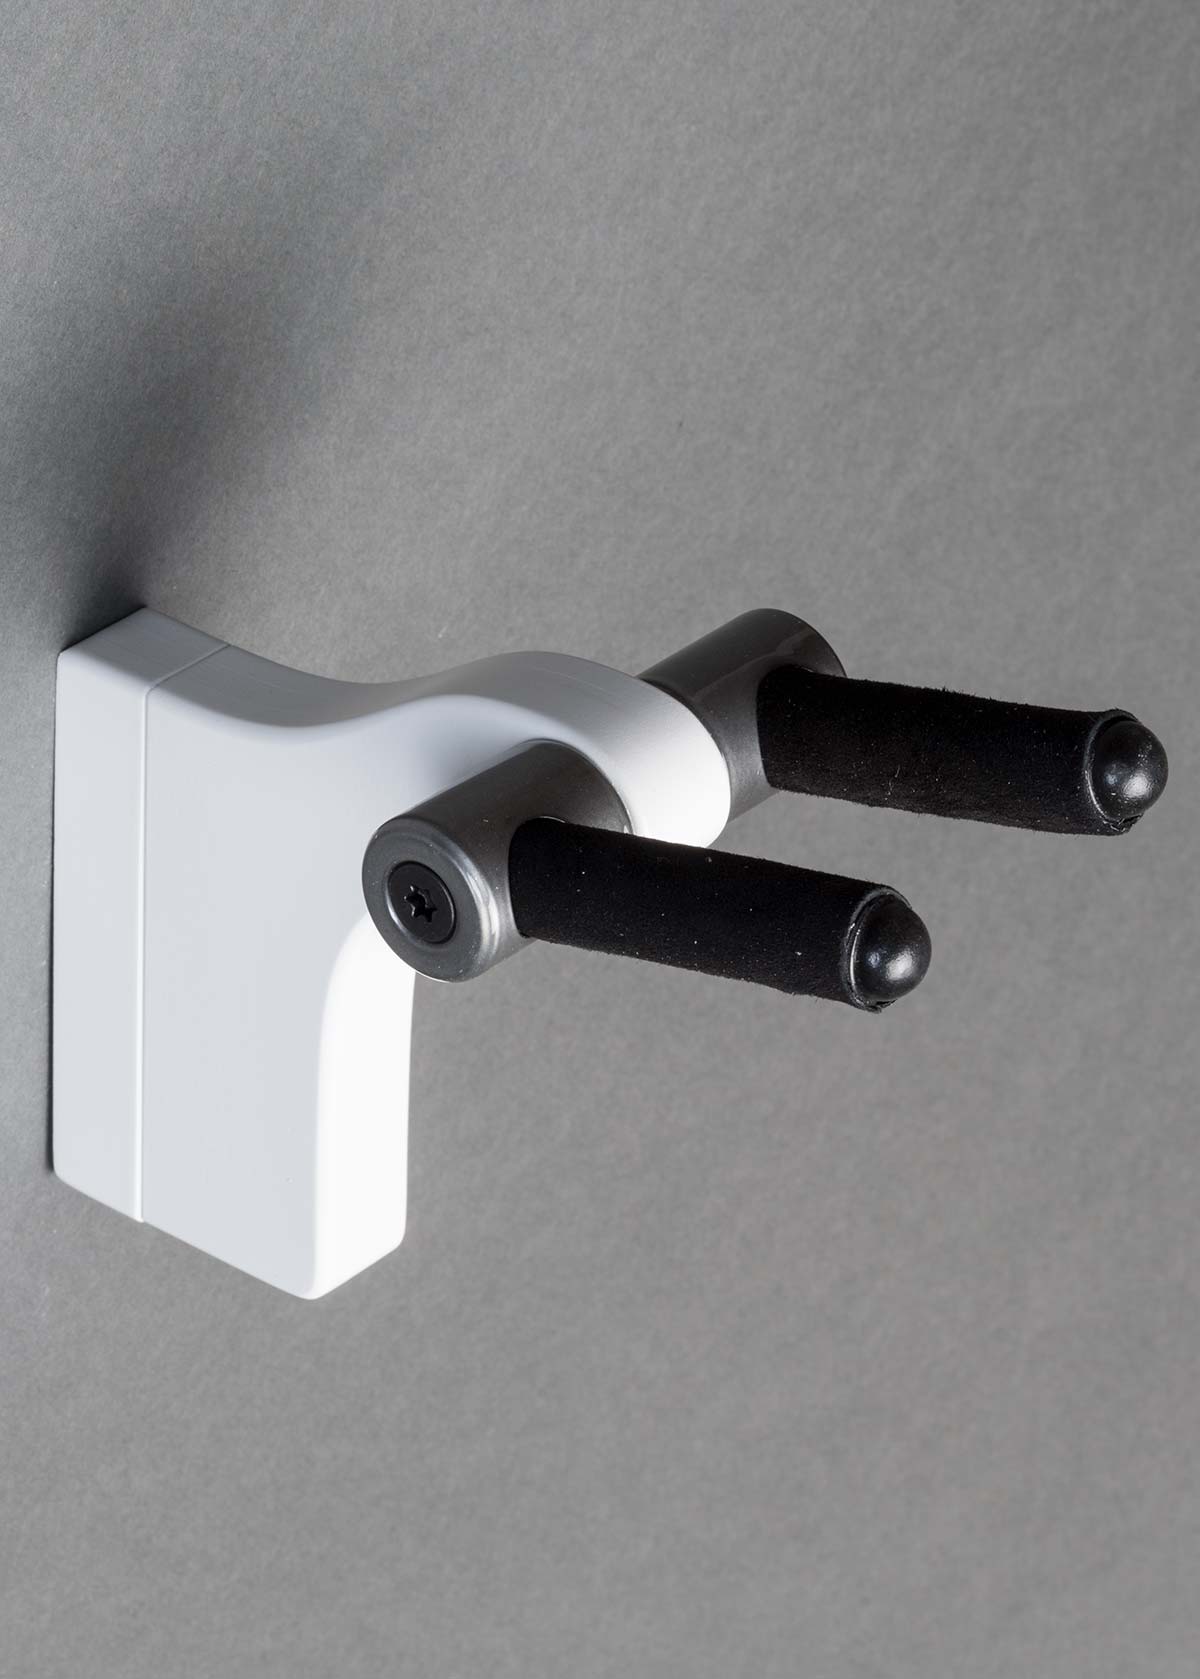 AM Design Wall Hangers by Take a Stand